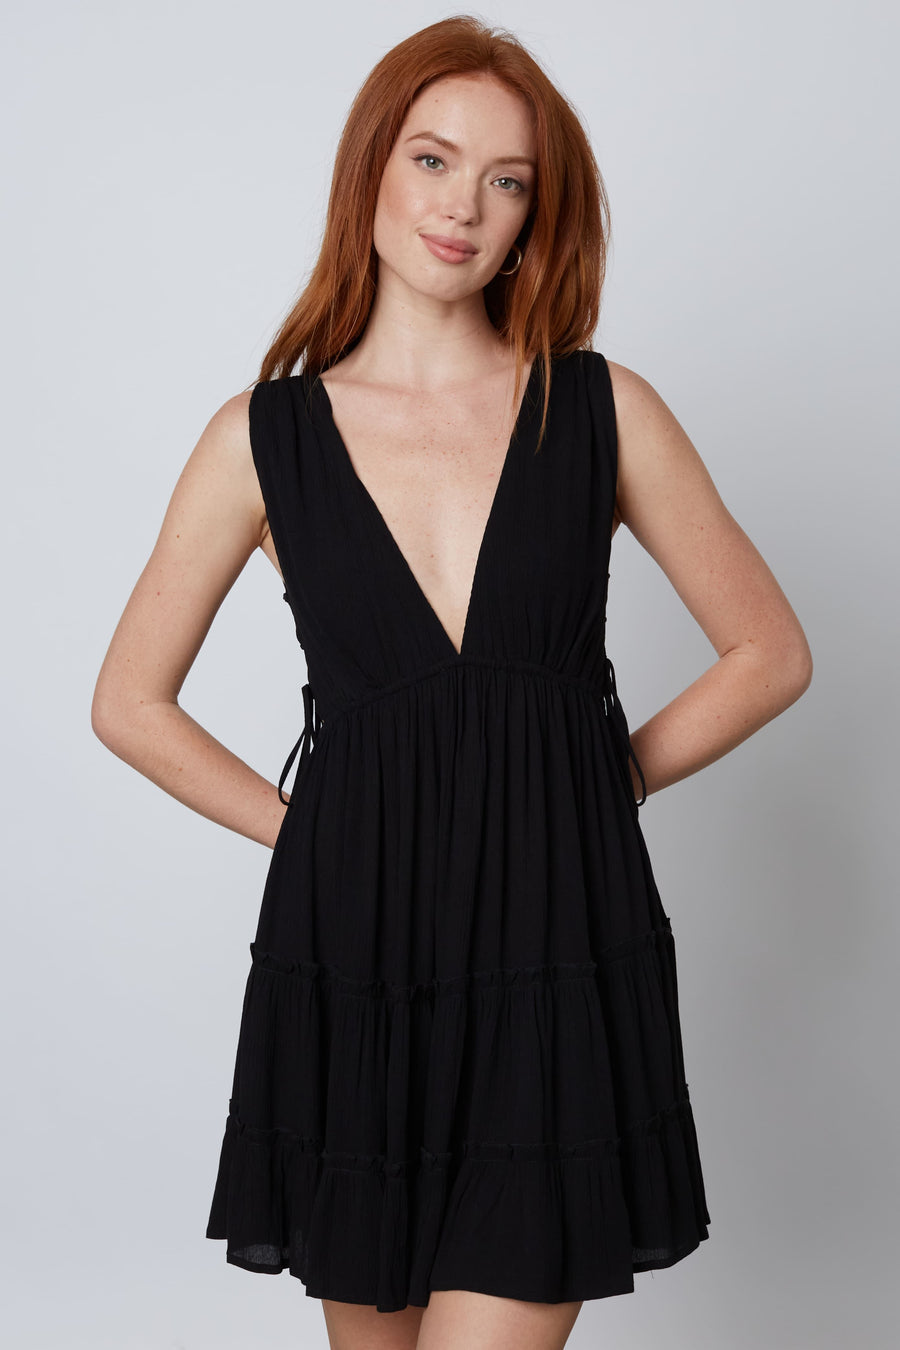 Black ruffle dress with a deep v-neckline with lace up side cut outs.